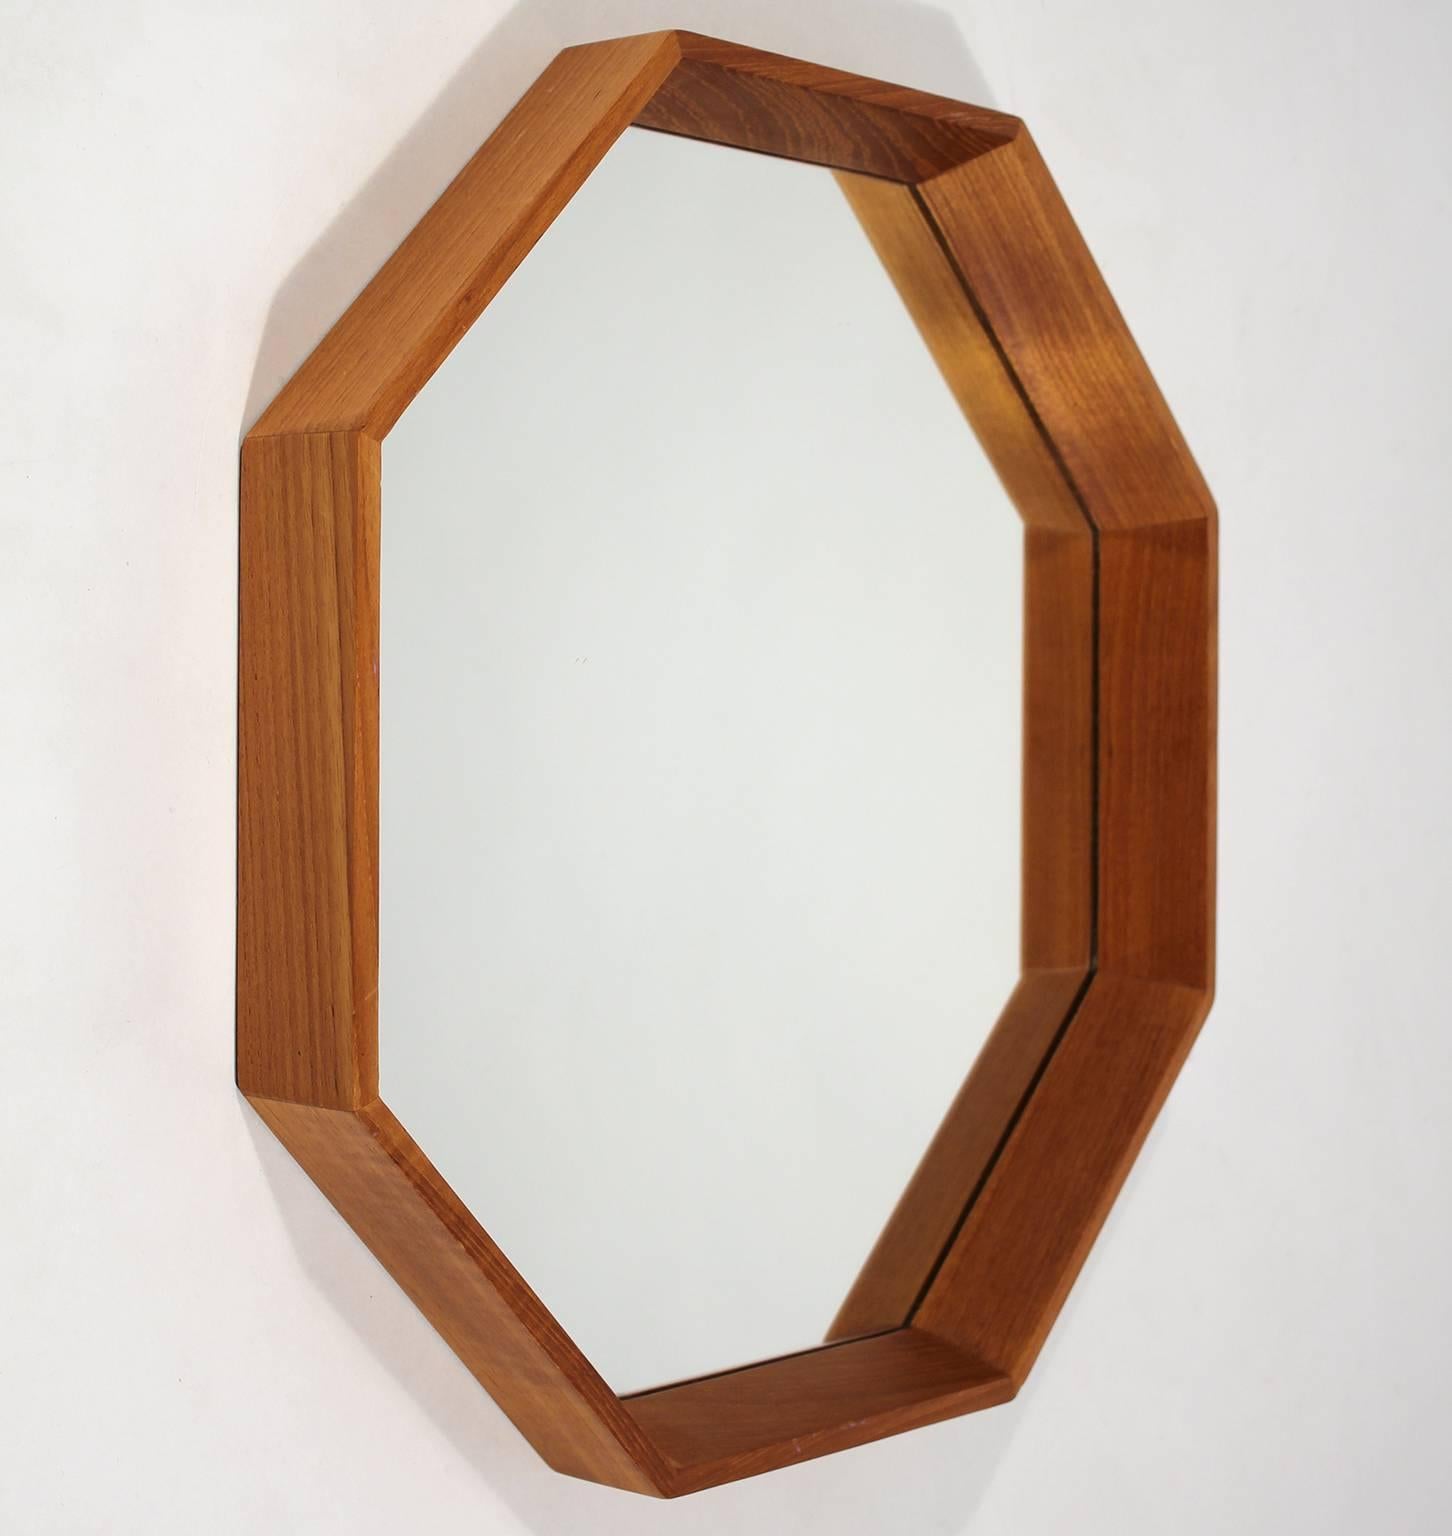 Great modernist Danish teak Octagon mirror designed by M.M. Spejle. In excellent shape with no issues. Mirror has no chips, no cracks and no scratches. Frame has been hand oiled and has wonderful grain and color.